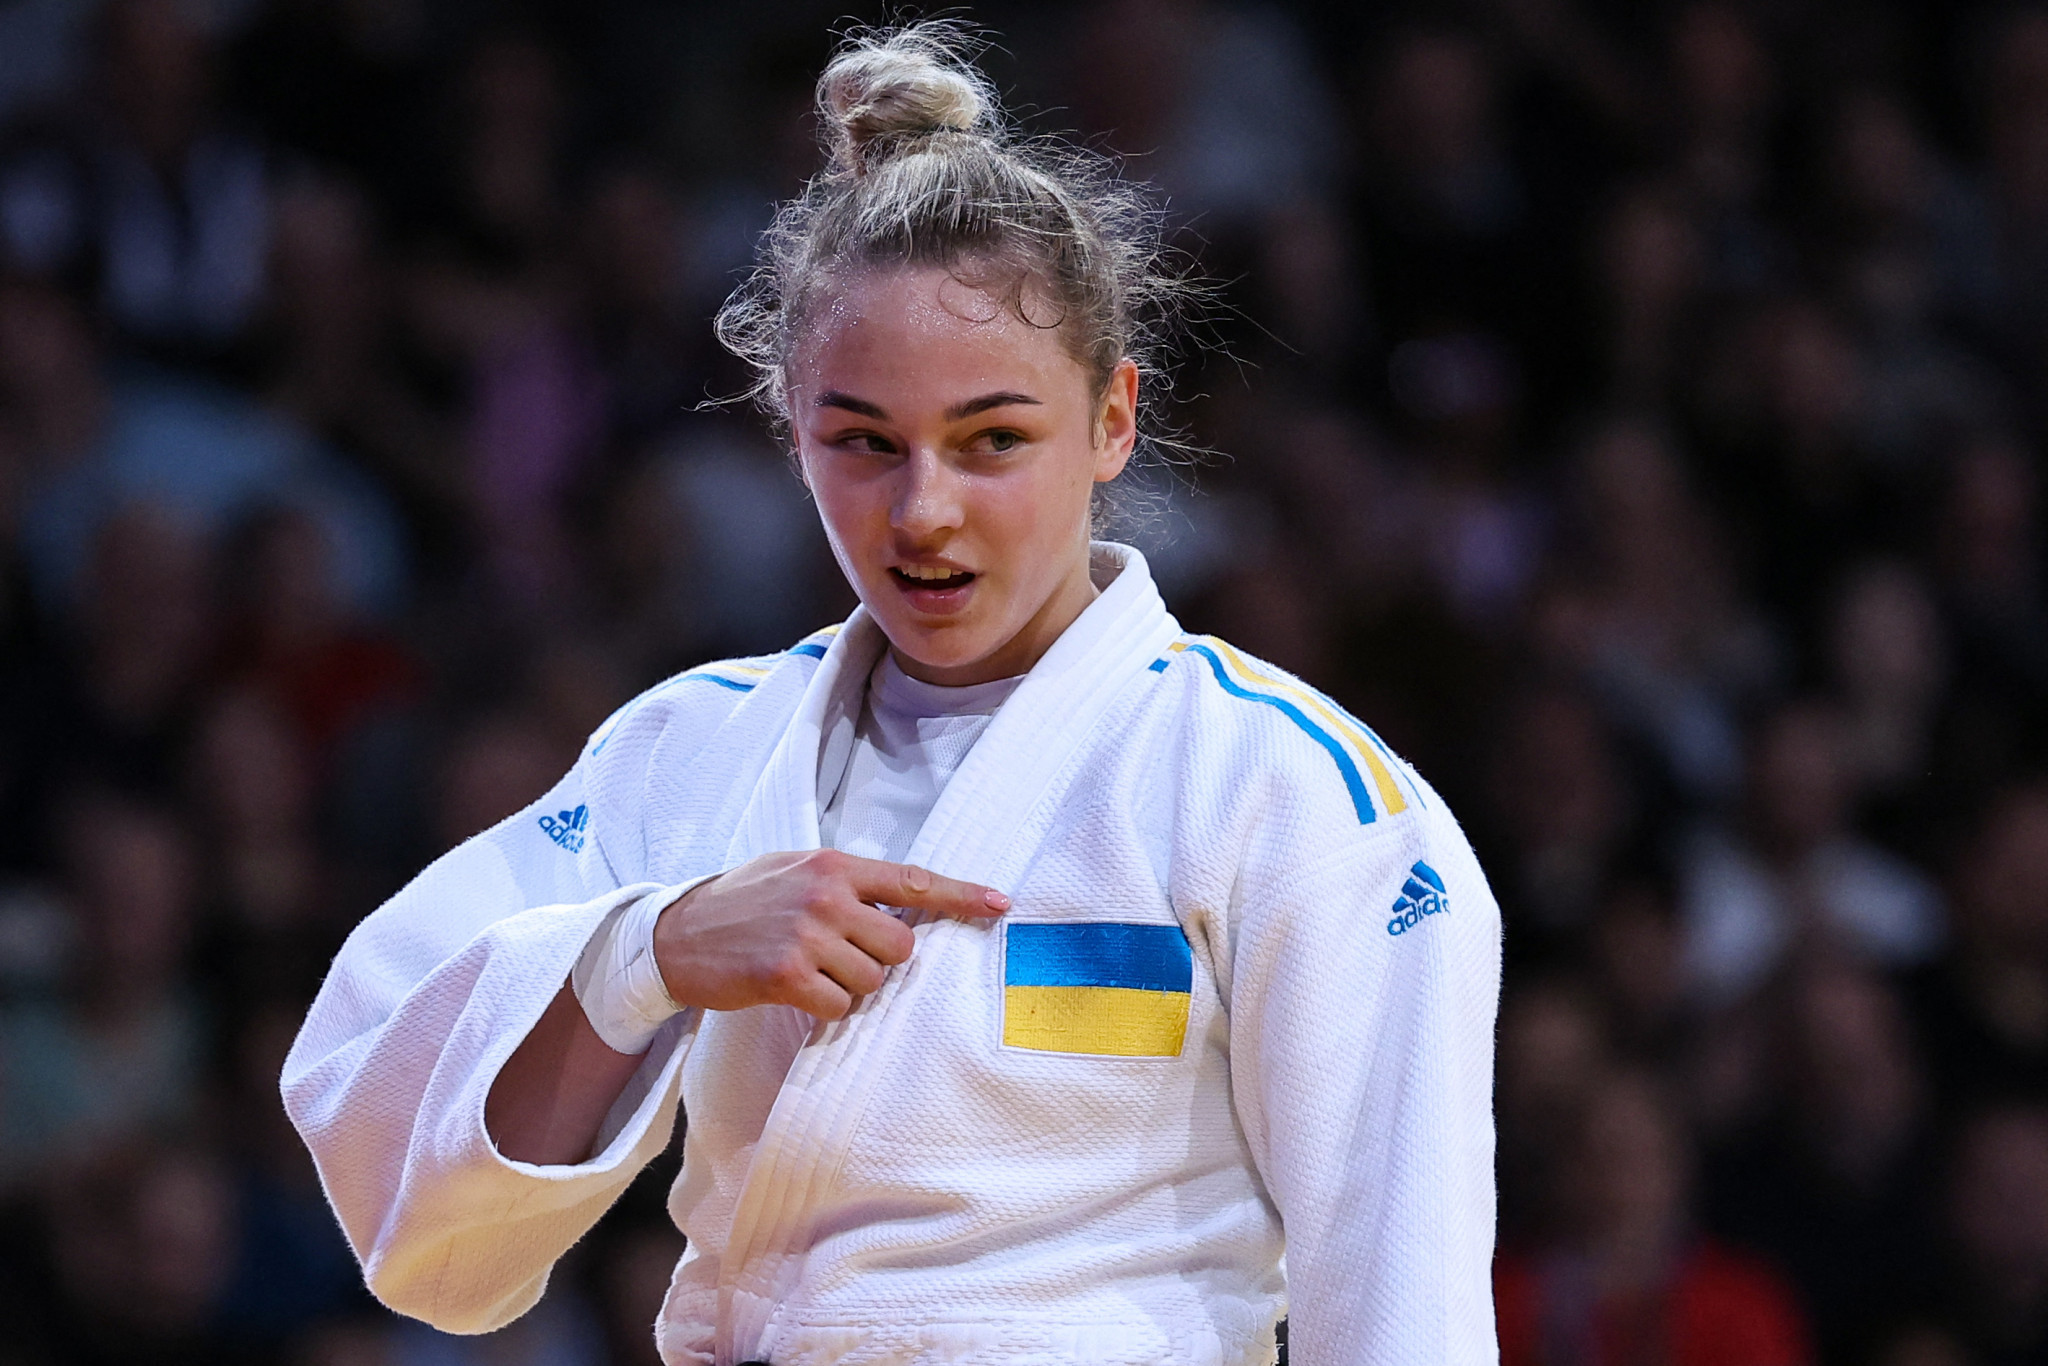 Ukraine, including double world champion and Olympic bronze medallist Daria Bilodid, have announced they are boycotting the World Judo Championships after a ban on Russians competing was lifted ©Getty Images